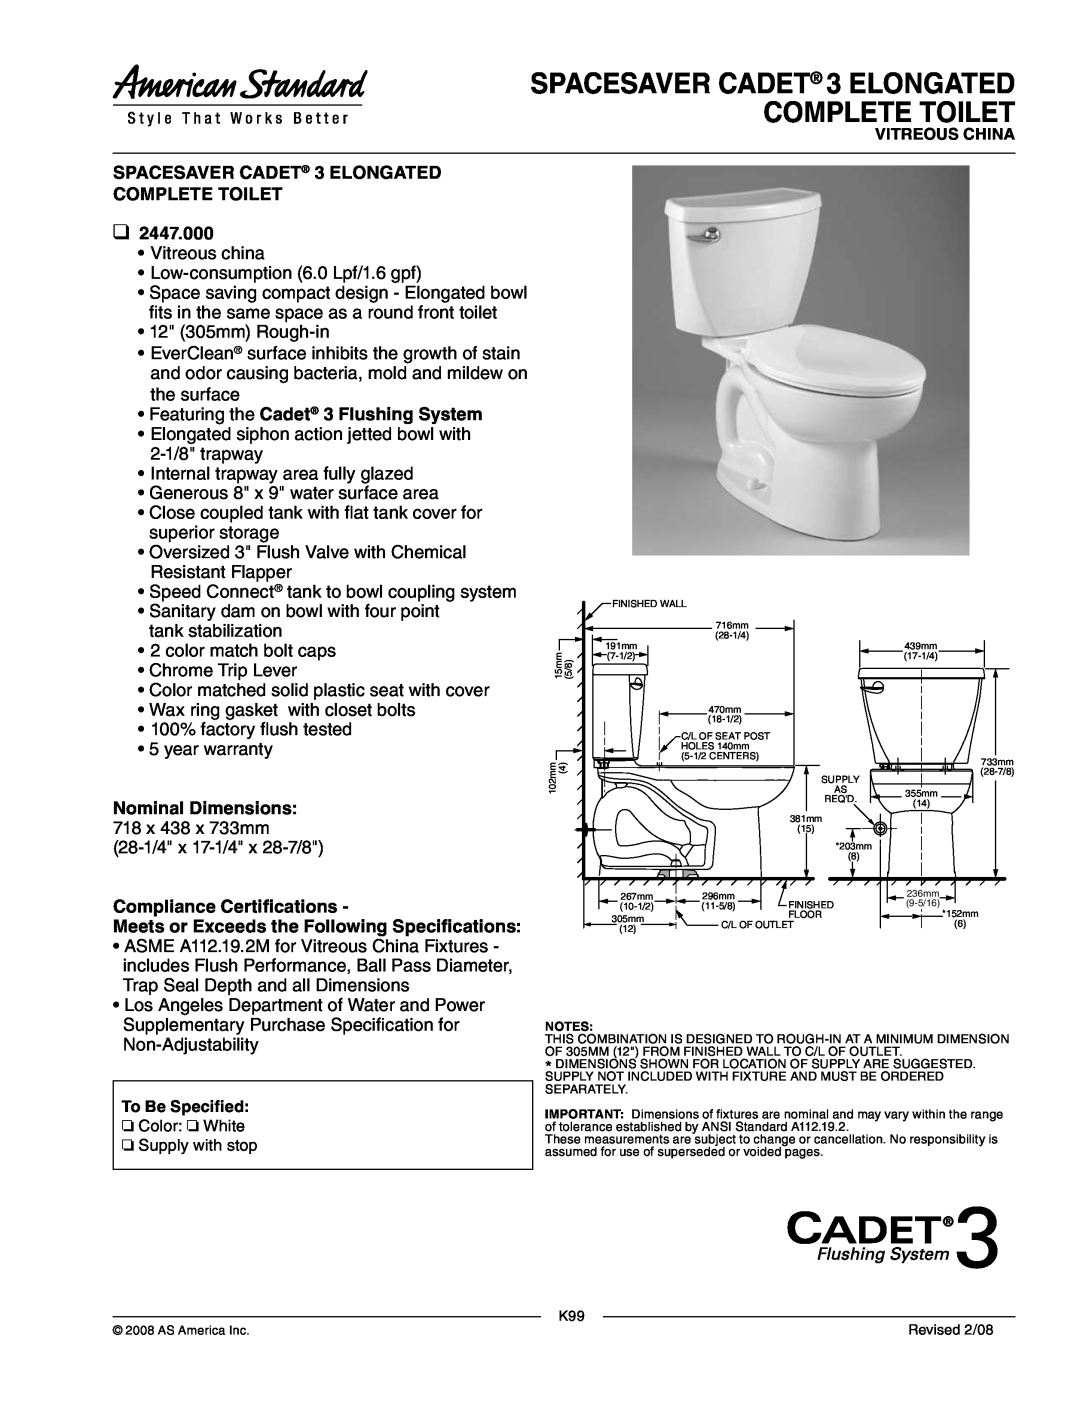 American Standard 2447.000 warranty SPACESAVER CADET 3 ELONGATED COMPLETE TOILET, Featuring the Cadet 3 Flushing System 